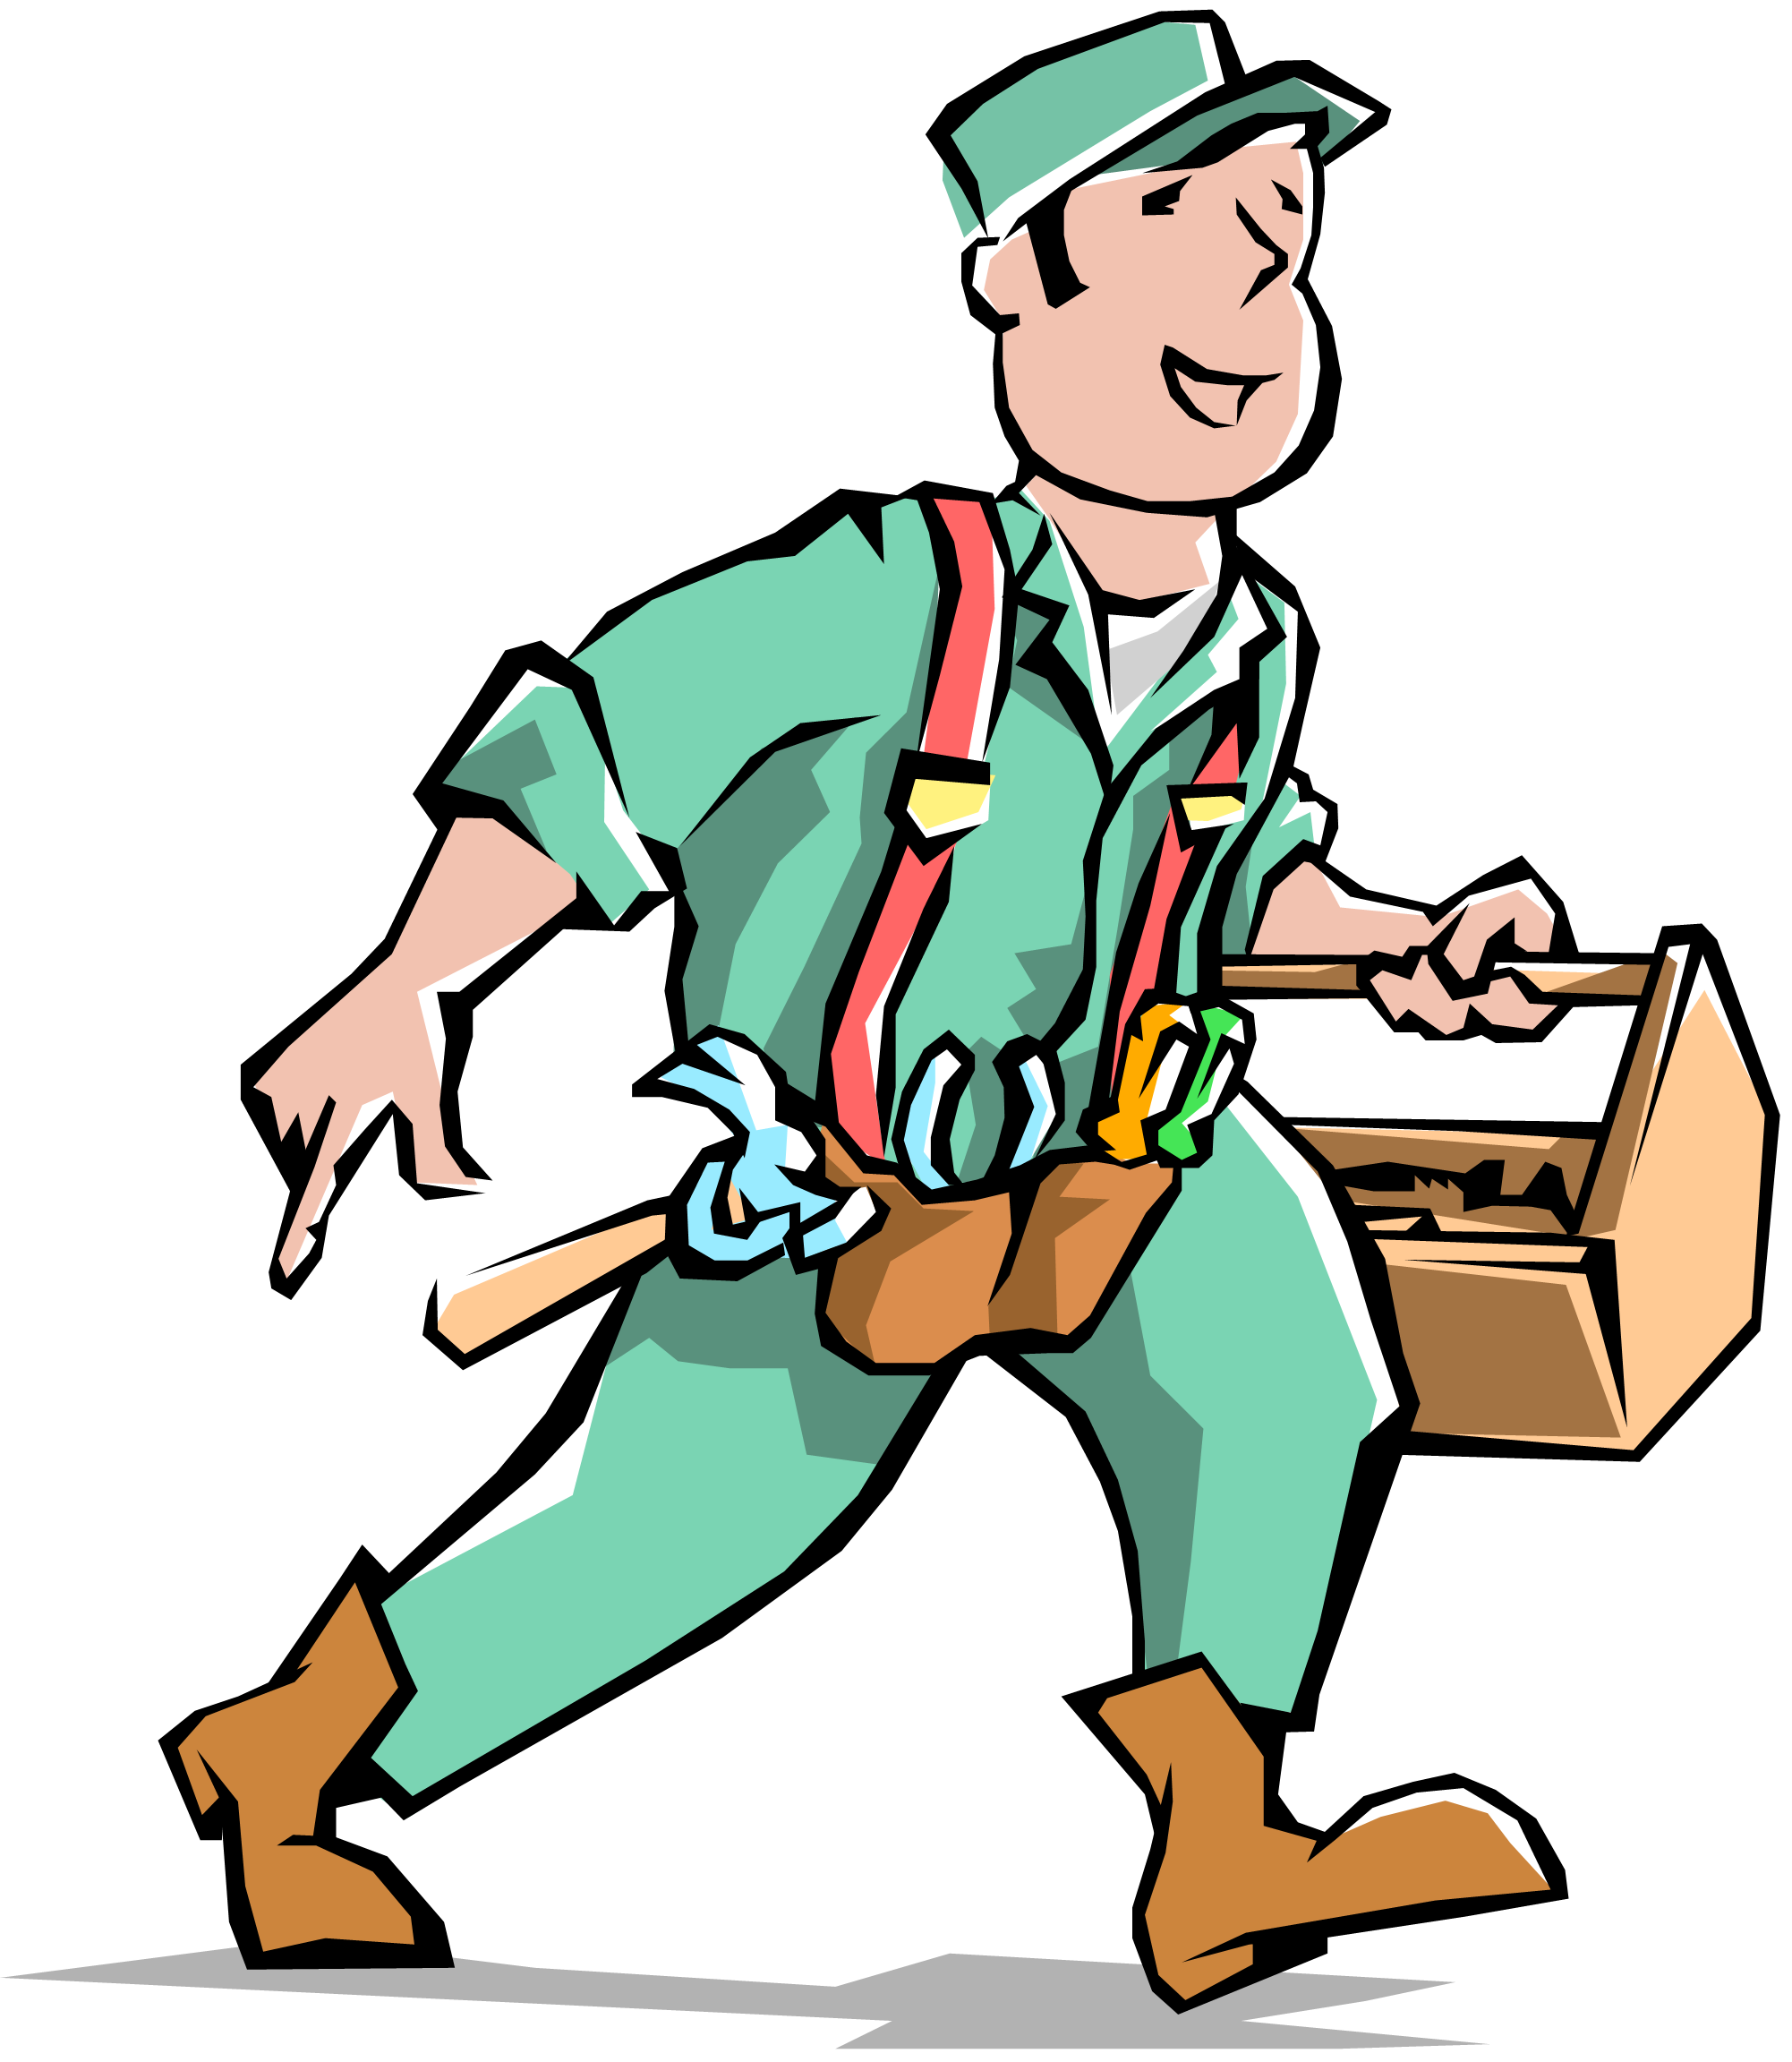 Handyman Clipart Handyman - Cliparts and Others Art Inspiration